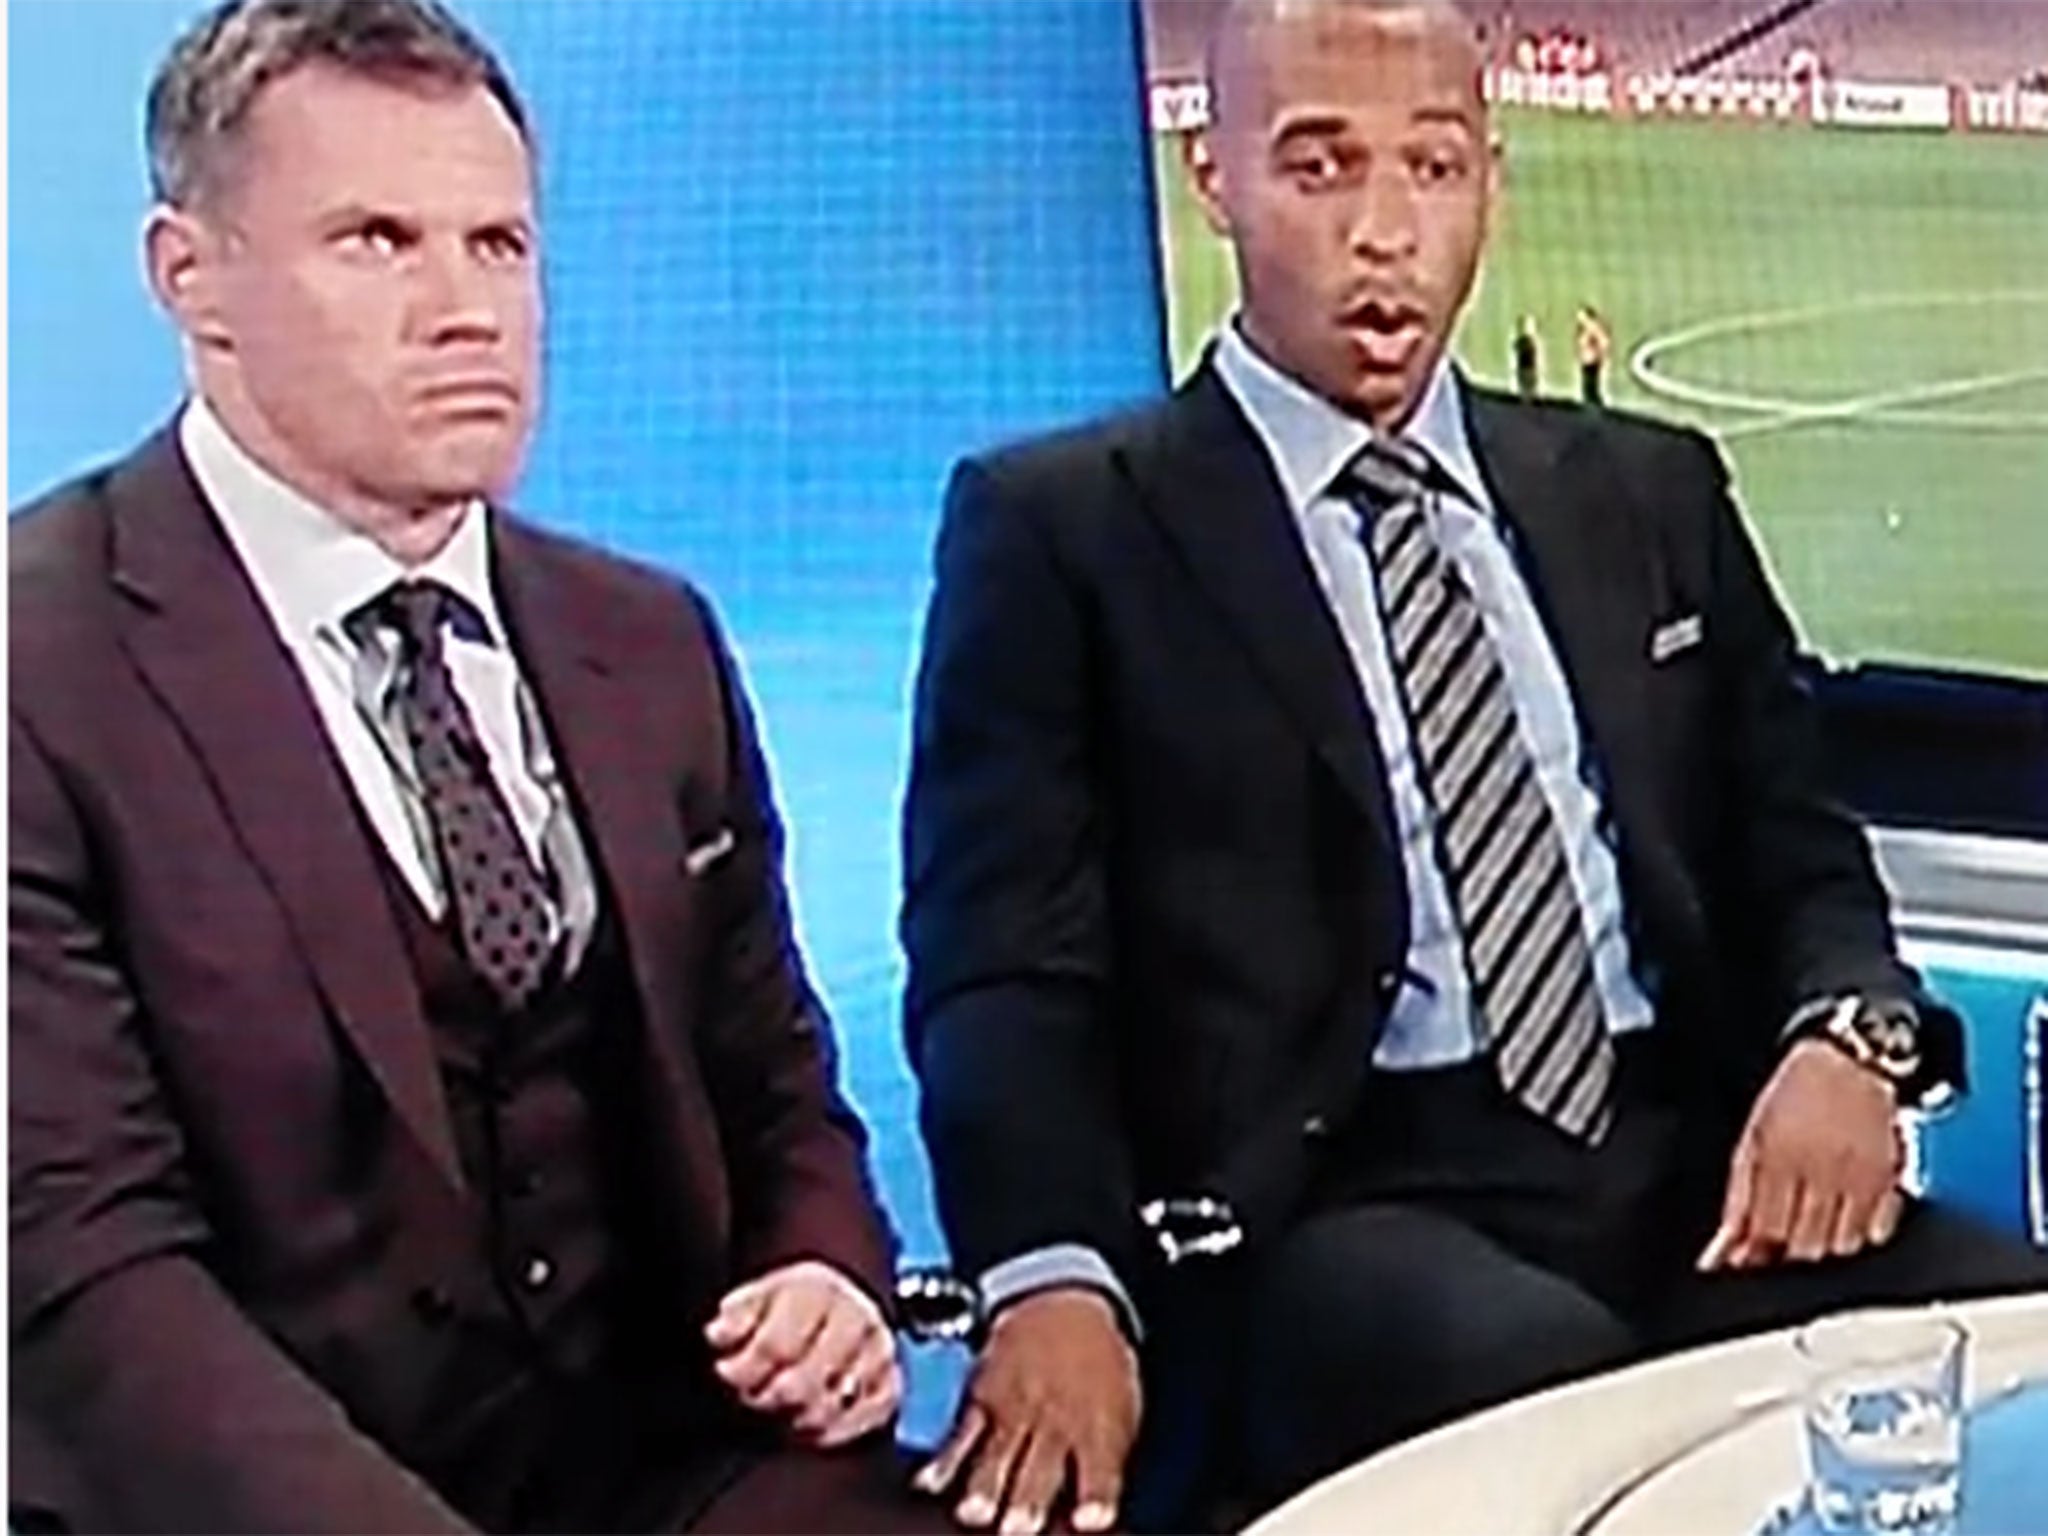 Thierry Henry and Jamie Carragher are delivered the news